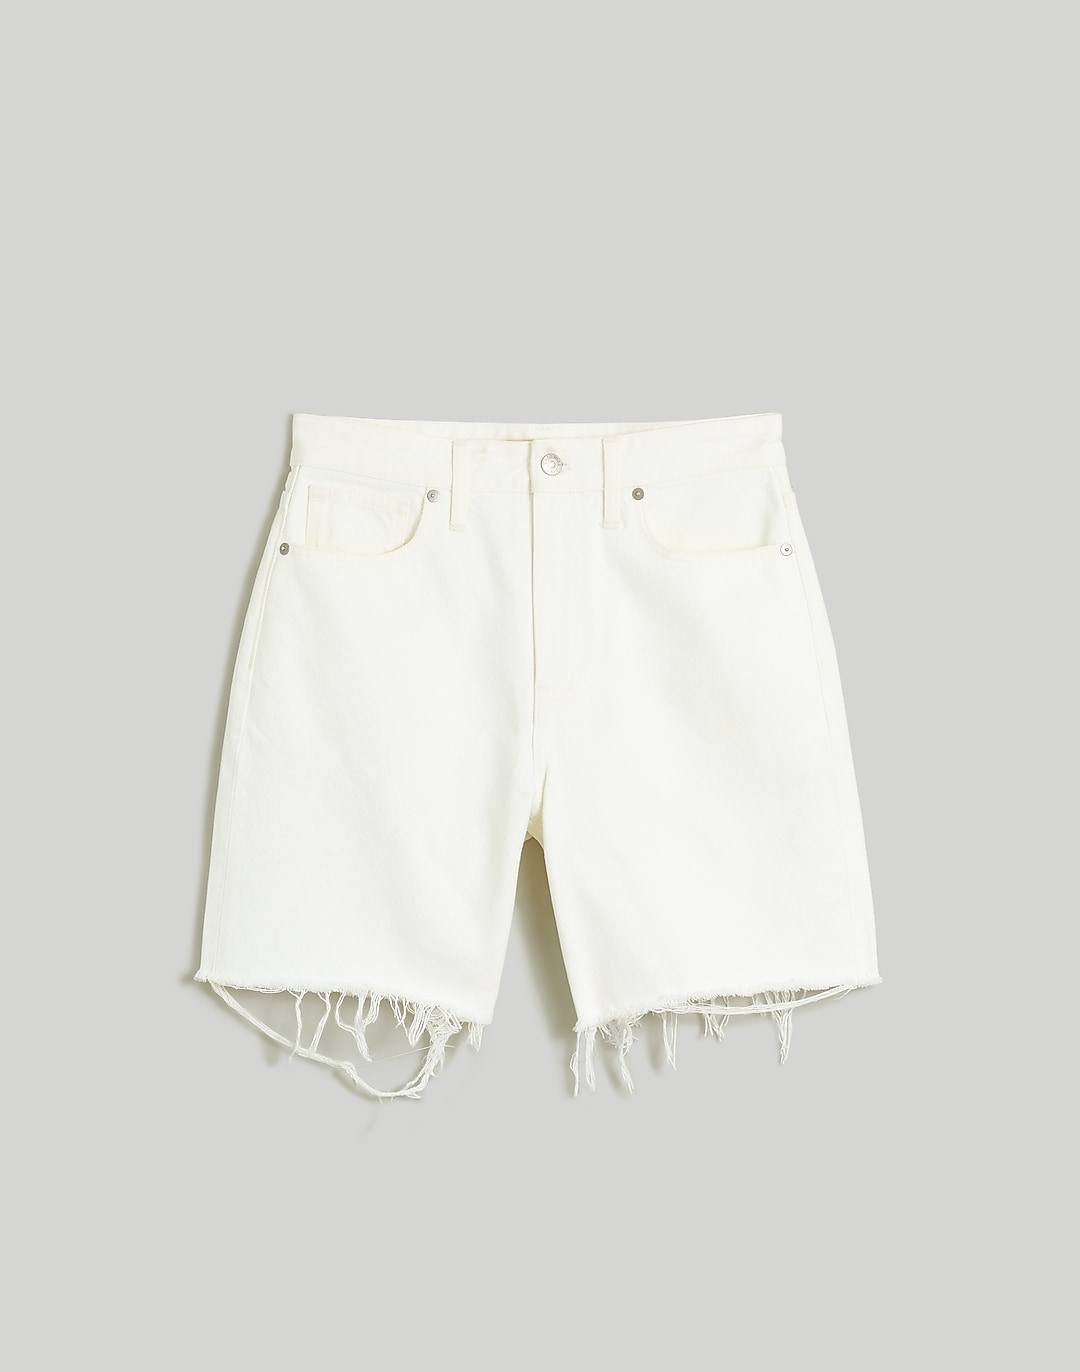 Baggy Jean Shorts in Tile White | Madewell